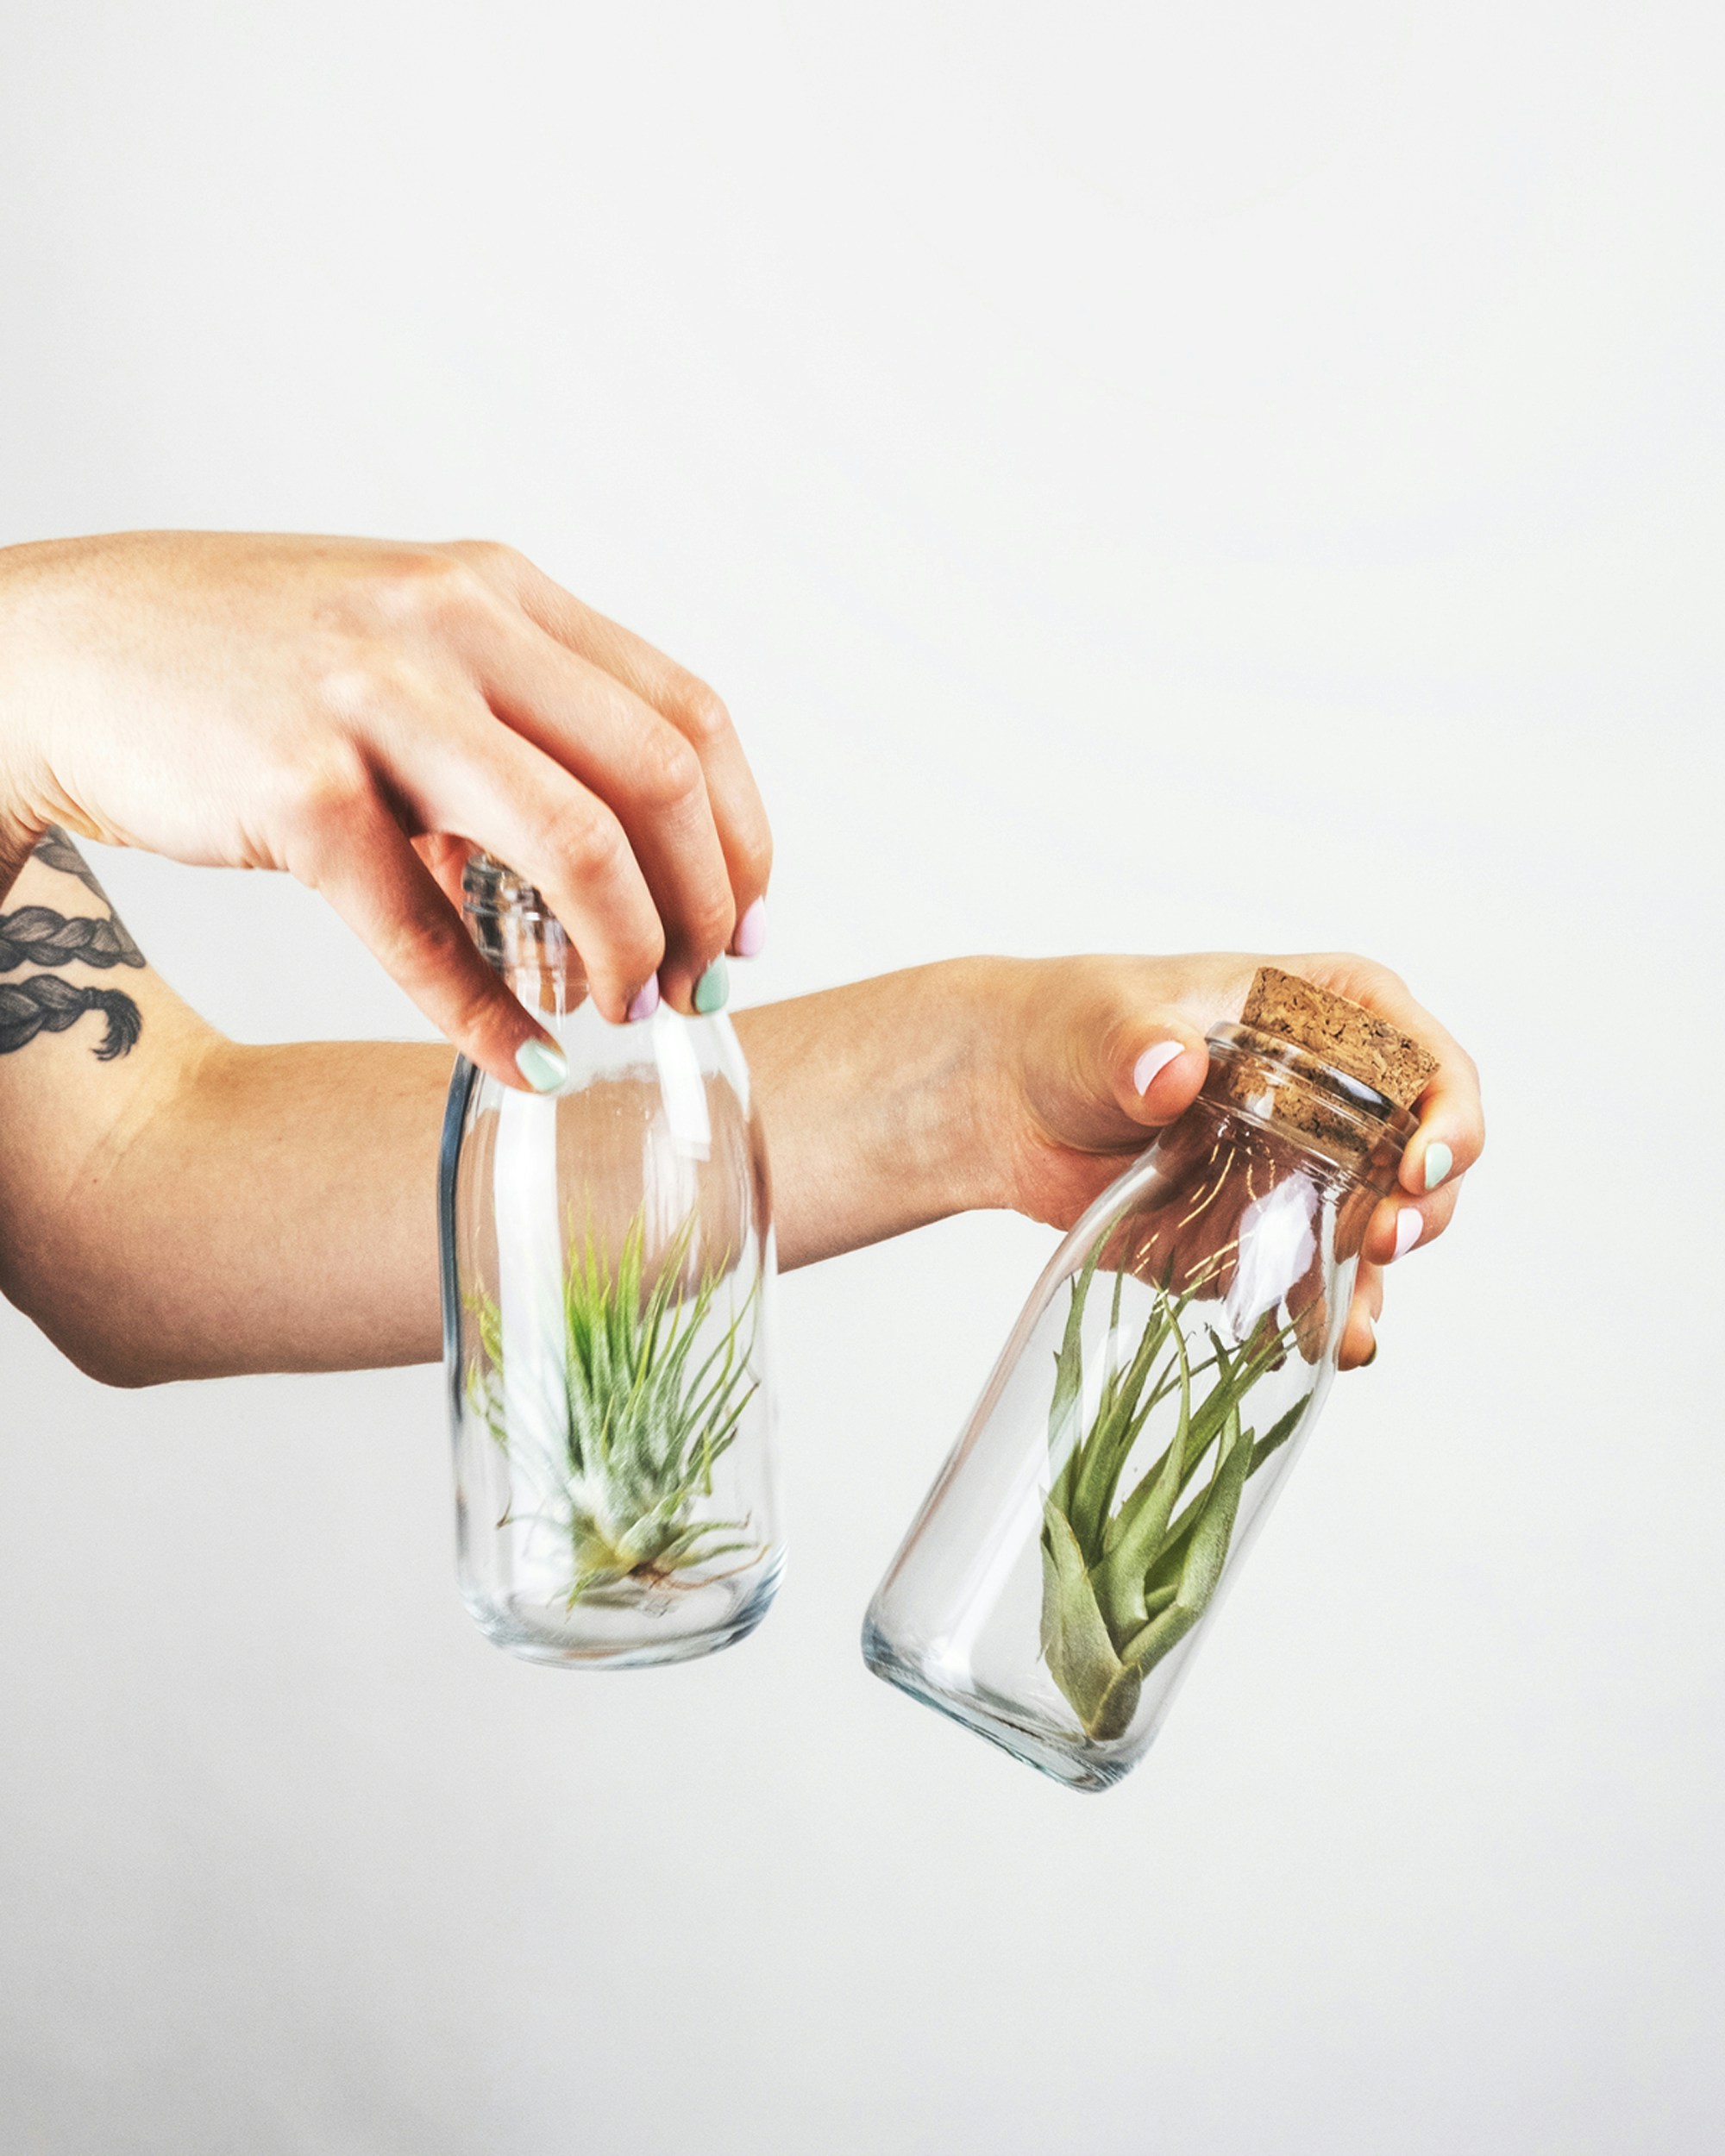 Studio shot of a woman holding two glasses filled with air plants.